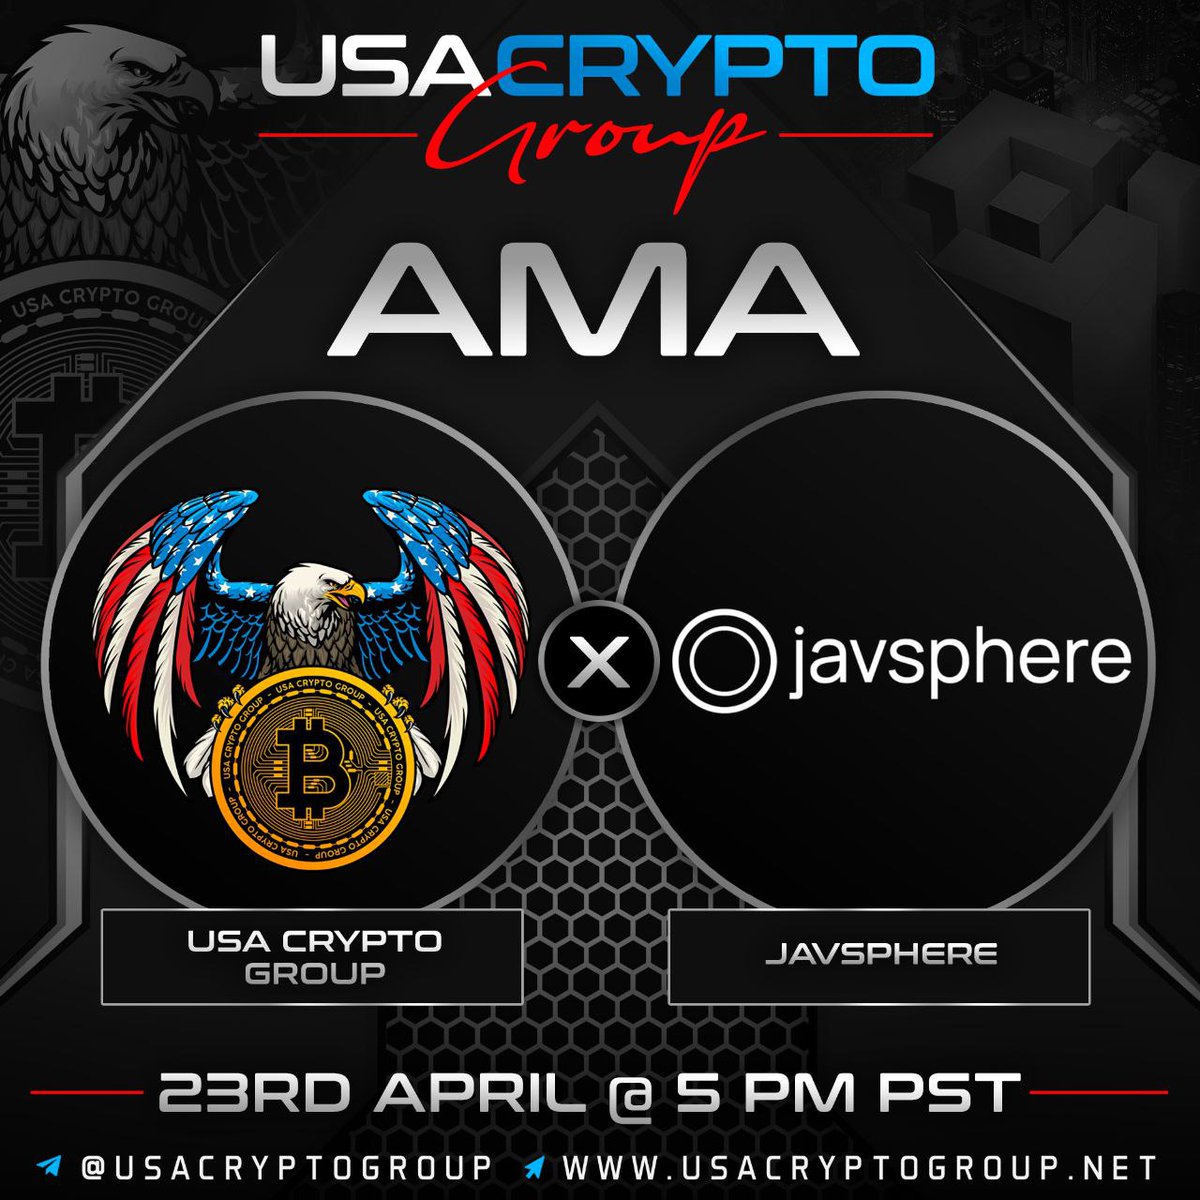 Venue: LiquiShare AMA Prize: Total: $80 giveaway Location: t.me/UsaCryptoGroup………… Twitter Cash Price: $15 of tokens Rules: Follow & Join @Javsphere @USACryptoGroup -Like, RT, comment